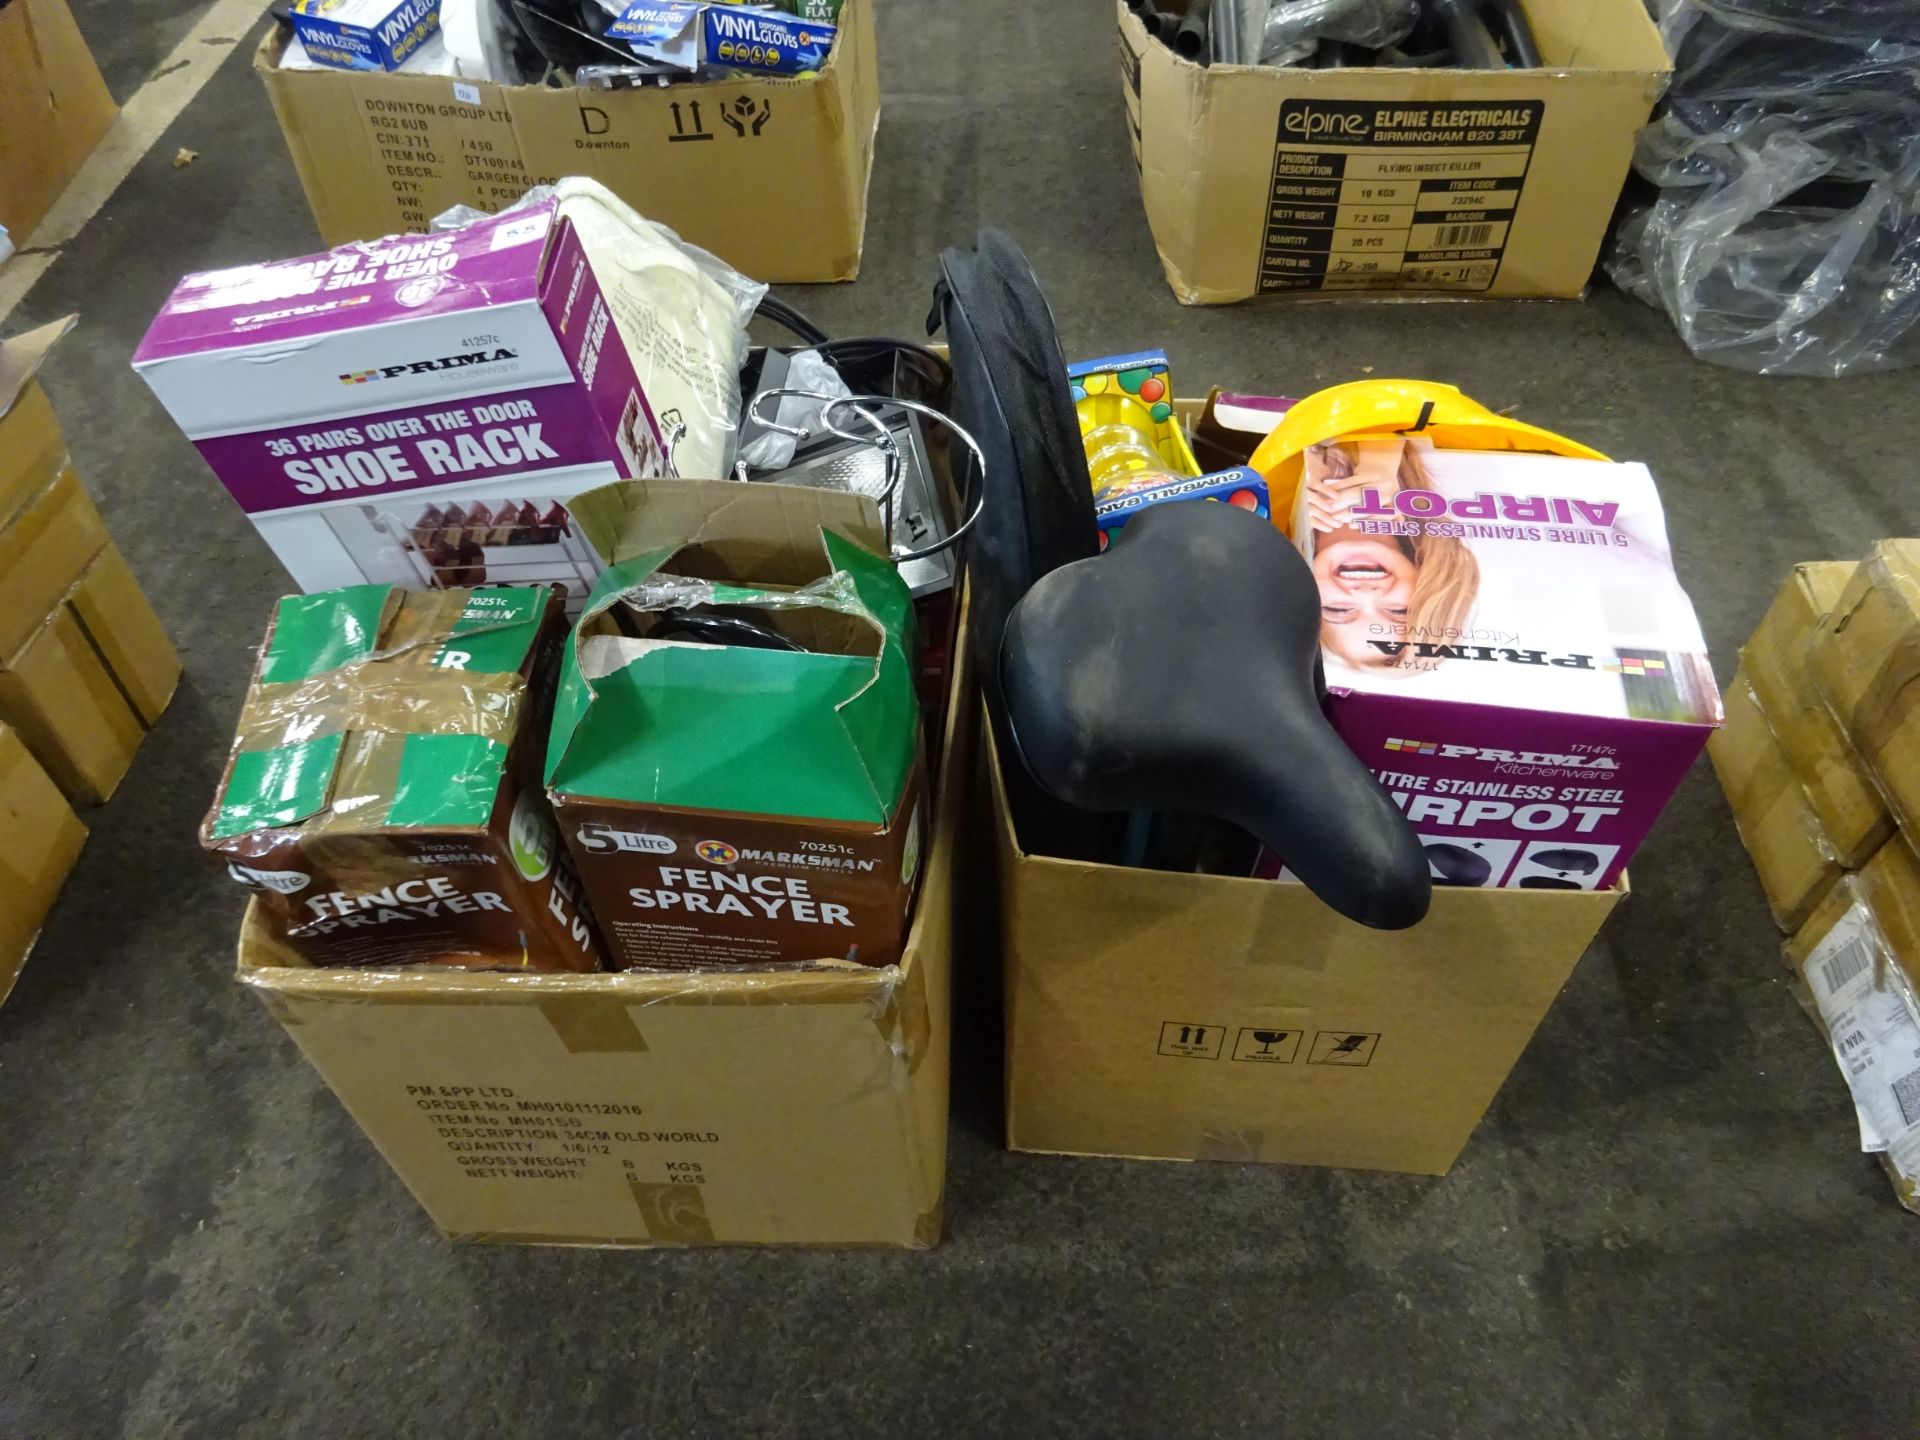 X2 BOXES OF FENCE SPRAYERS, AIR PORTS,KITCHENWARE & ODDS